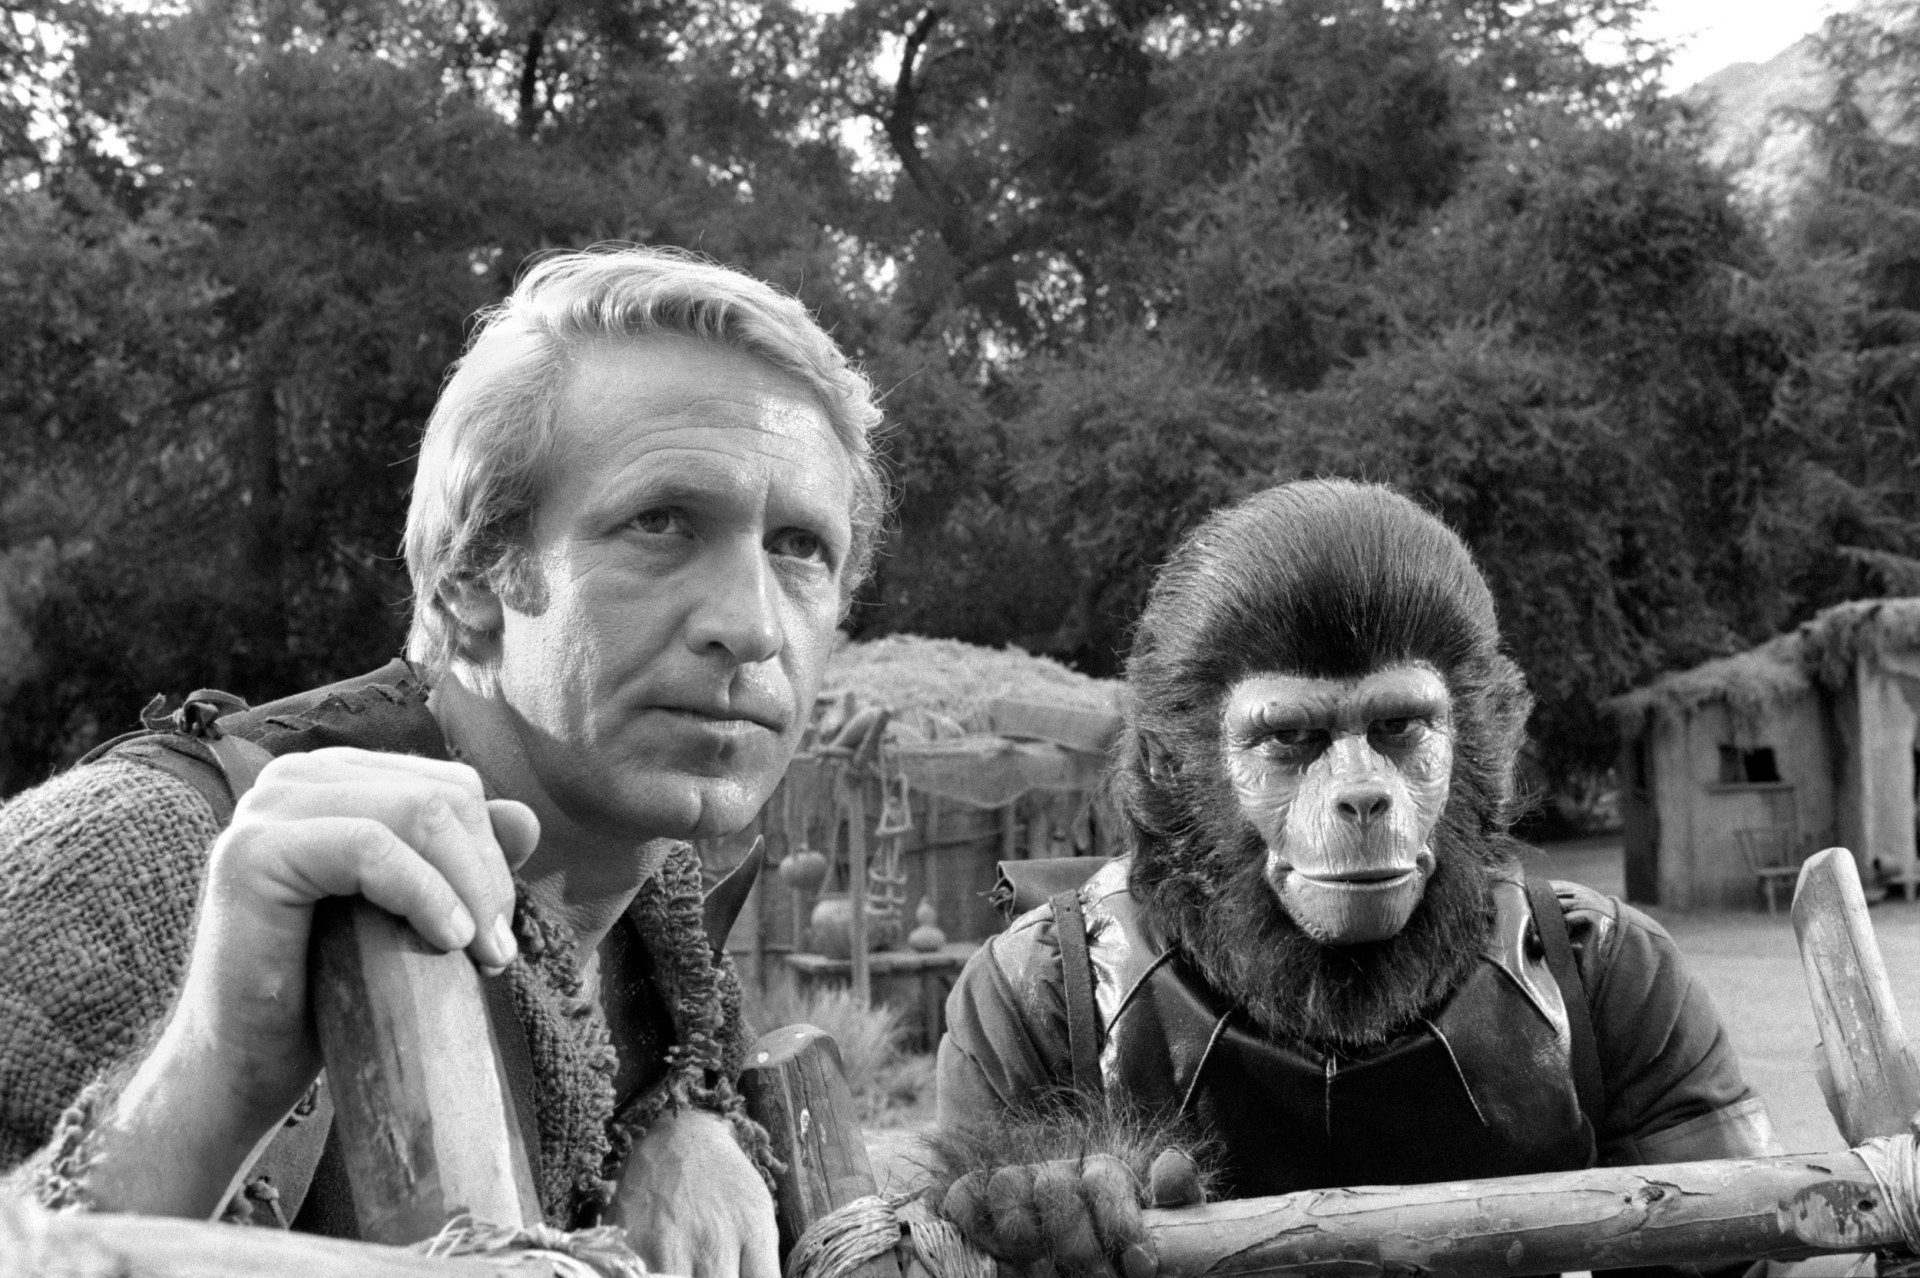 Planet of the Apes actor Ron Harper dies aged 91